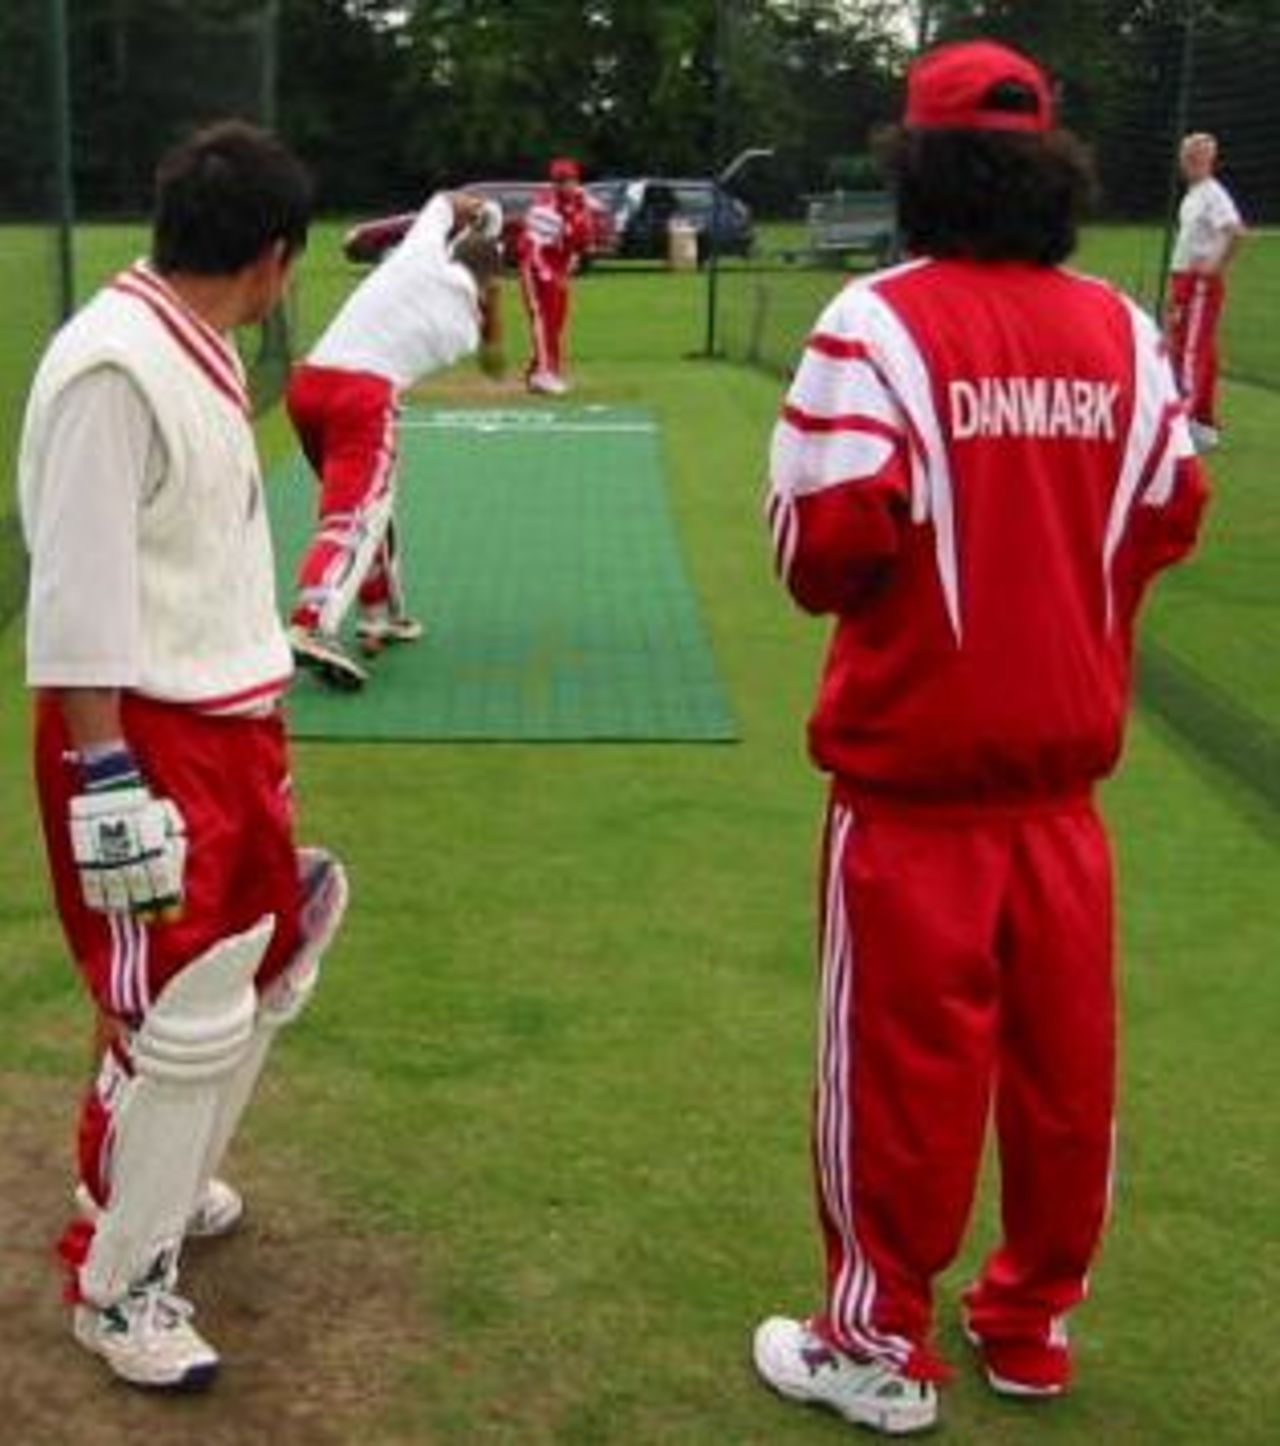 The Danish squad practising in the nets at Oundle School